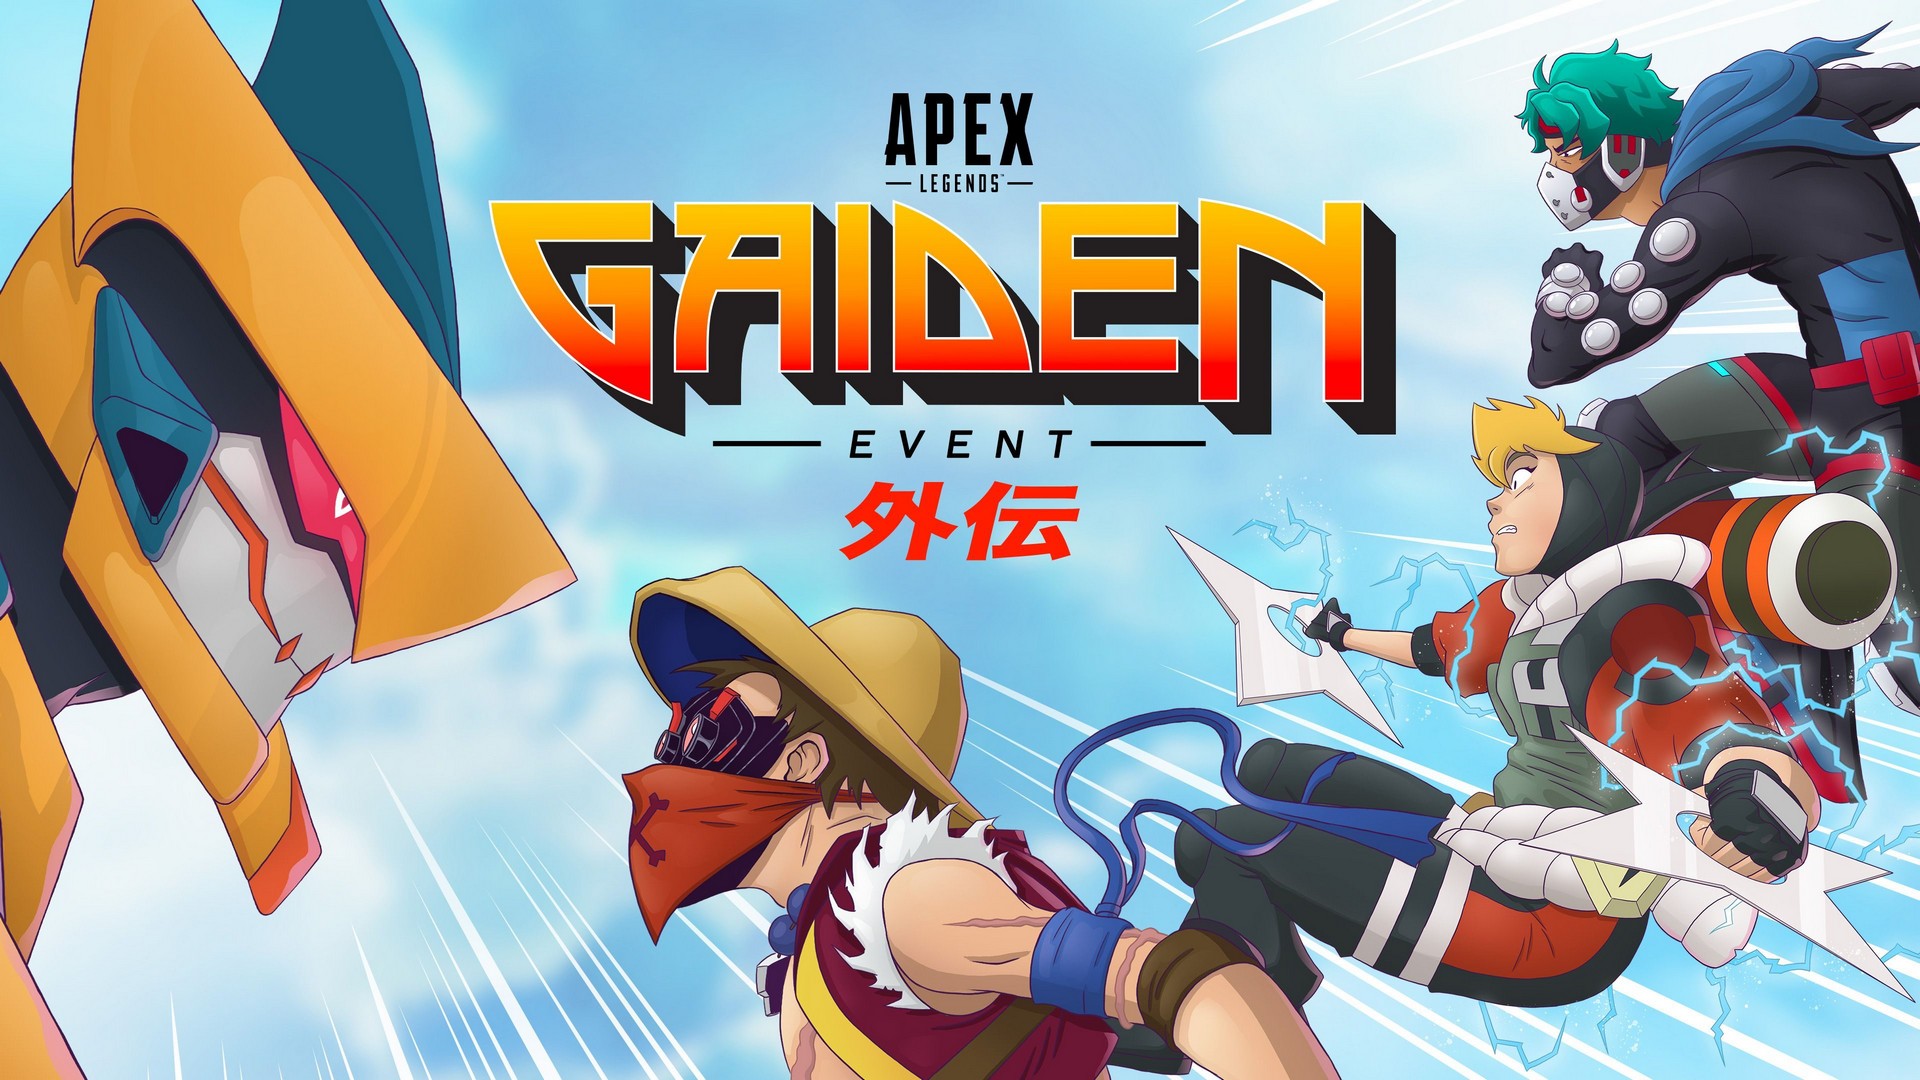 Begin Your Epic Tale In The Apex Legends Gaiden Event